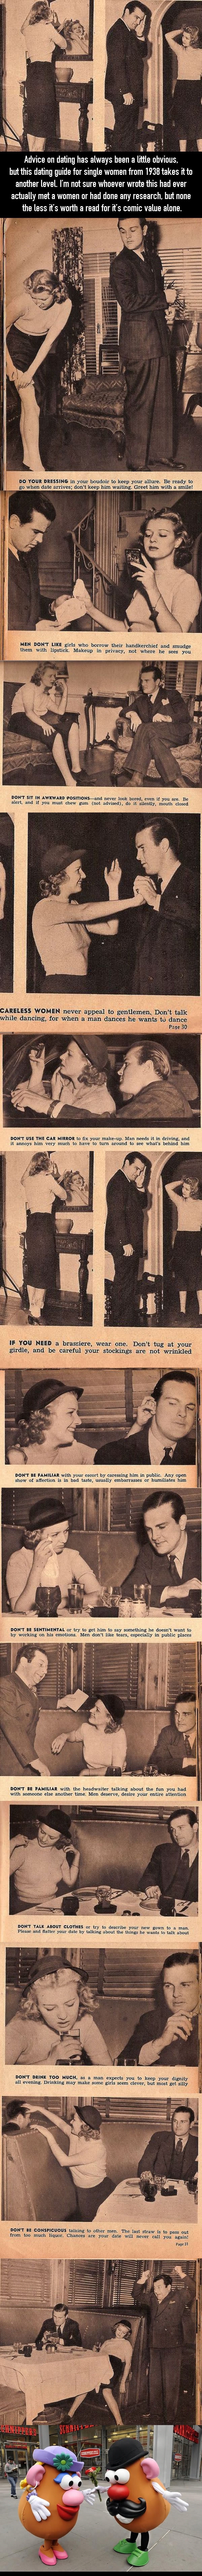 The 1930s was a rough time to be a lady dating